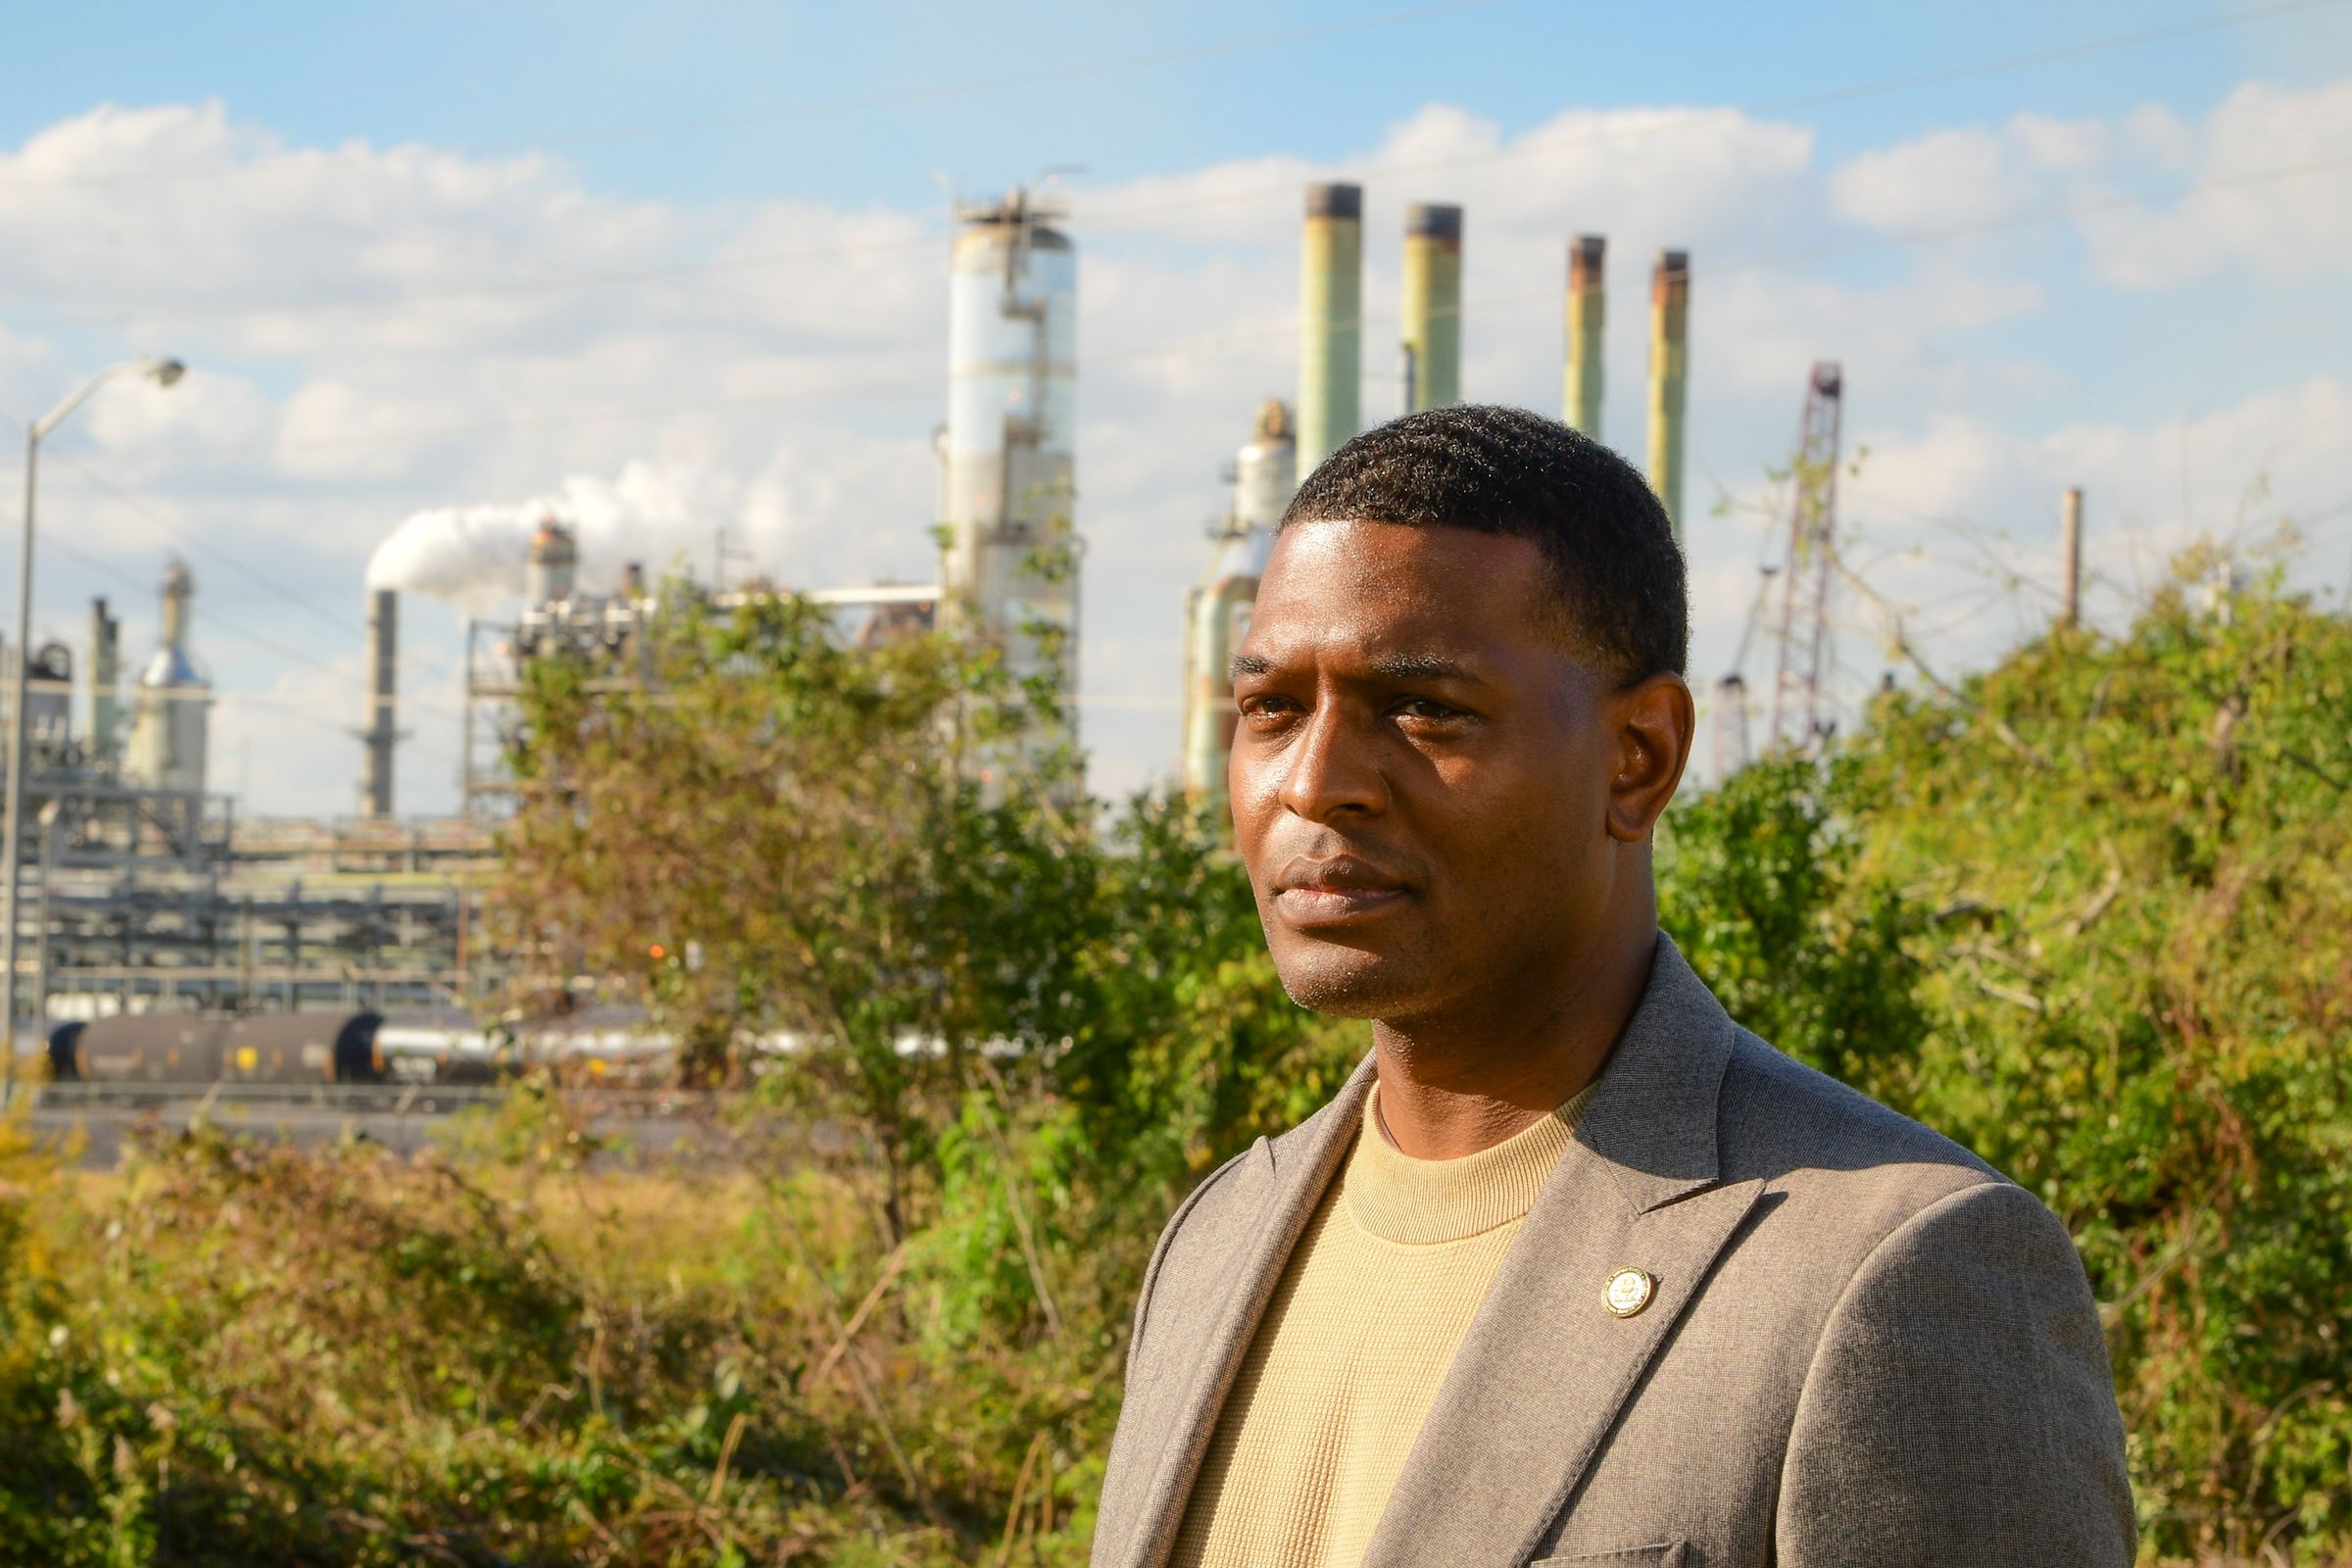 A close-up photo of Michael Regan with an industrial facility that looks like a power plant behind him.